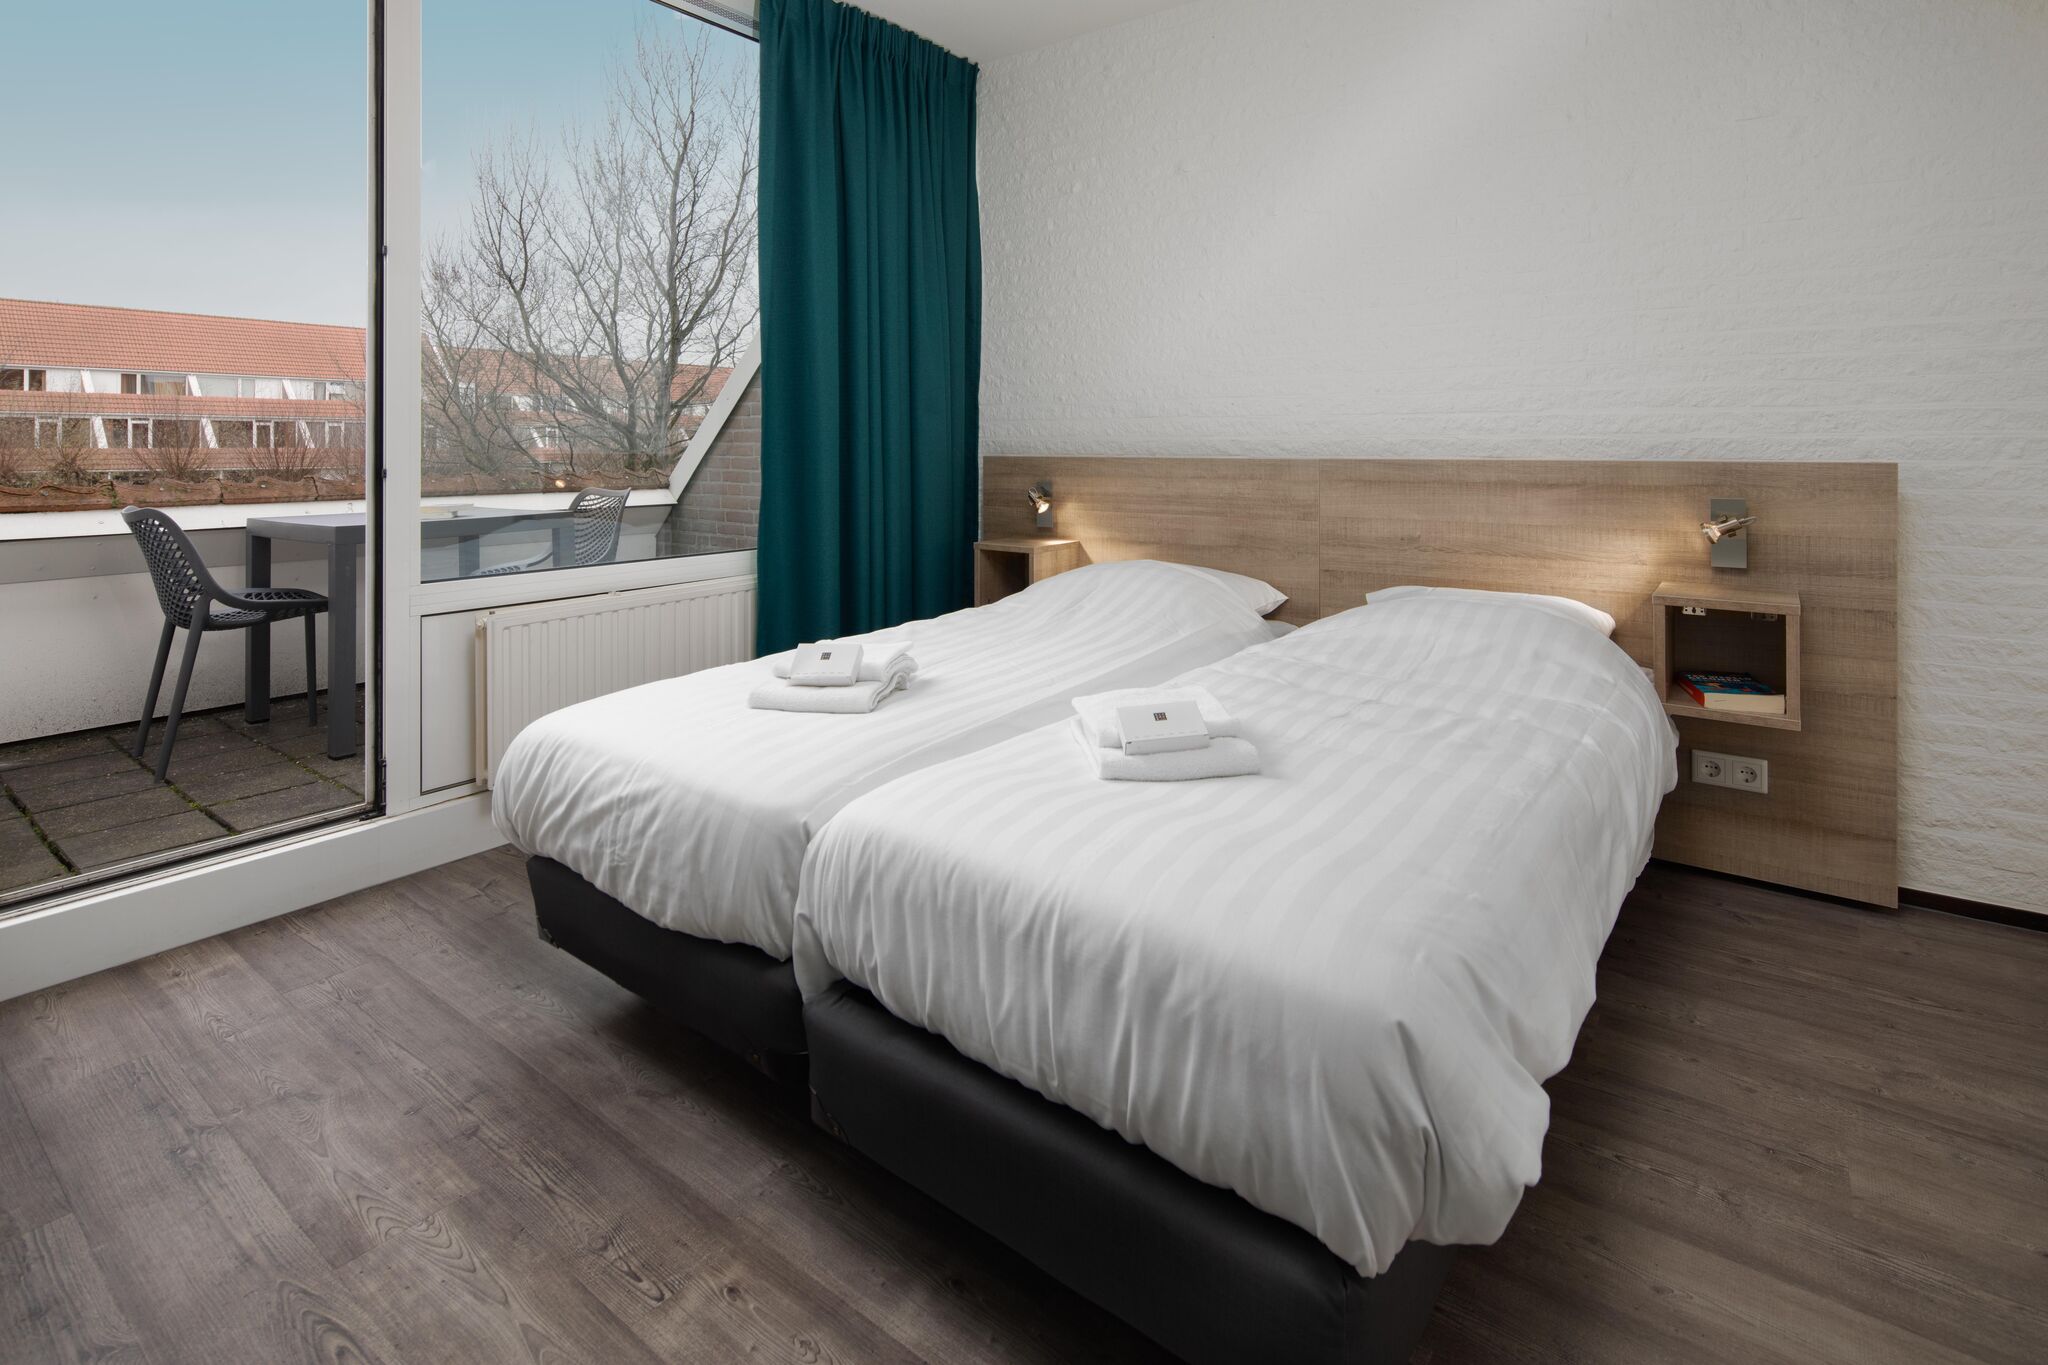 Restyled apartment with sauna, in a holiday park on the Grevelinger Meer